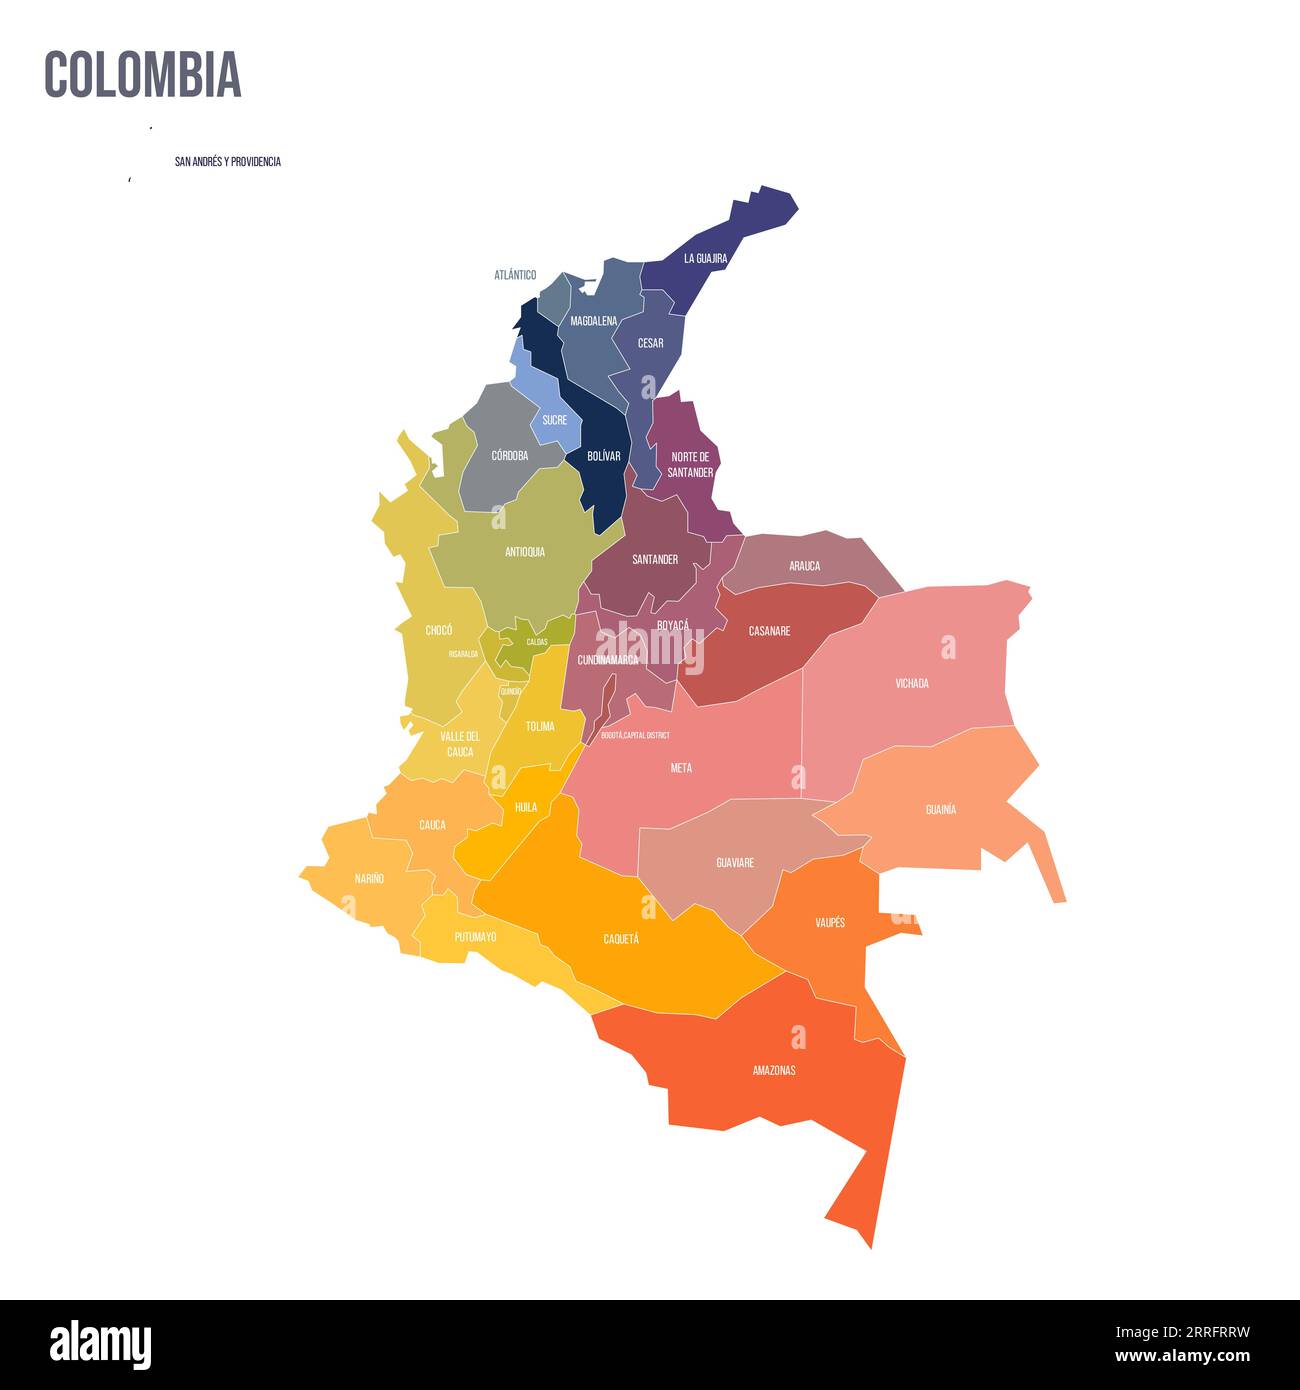 Colombia political map of administrative divisions - departments and capital district. Colorful spectrum political map with labels and country name. Stock Vector